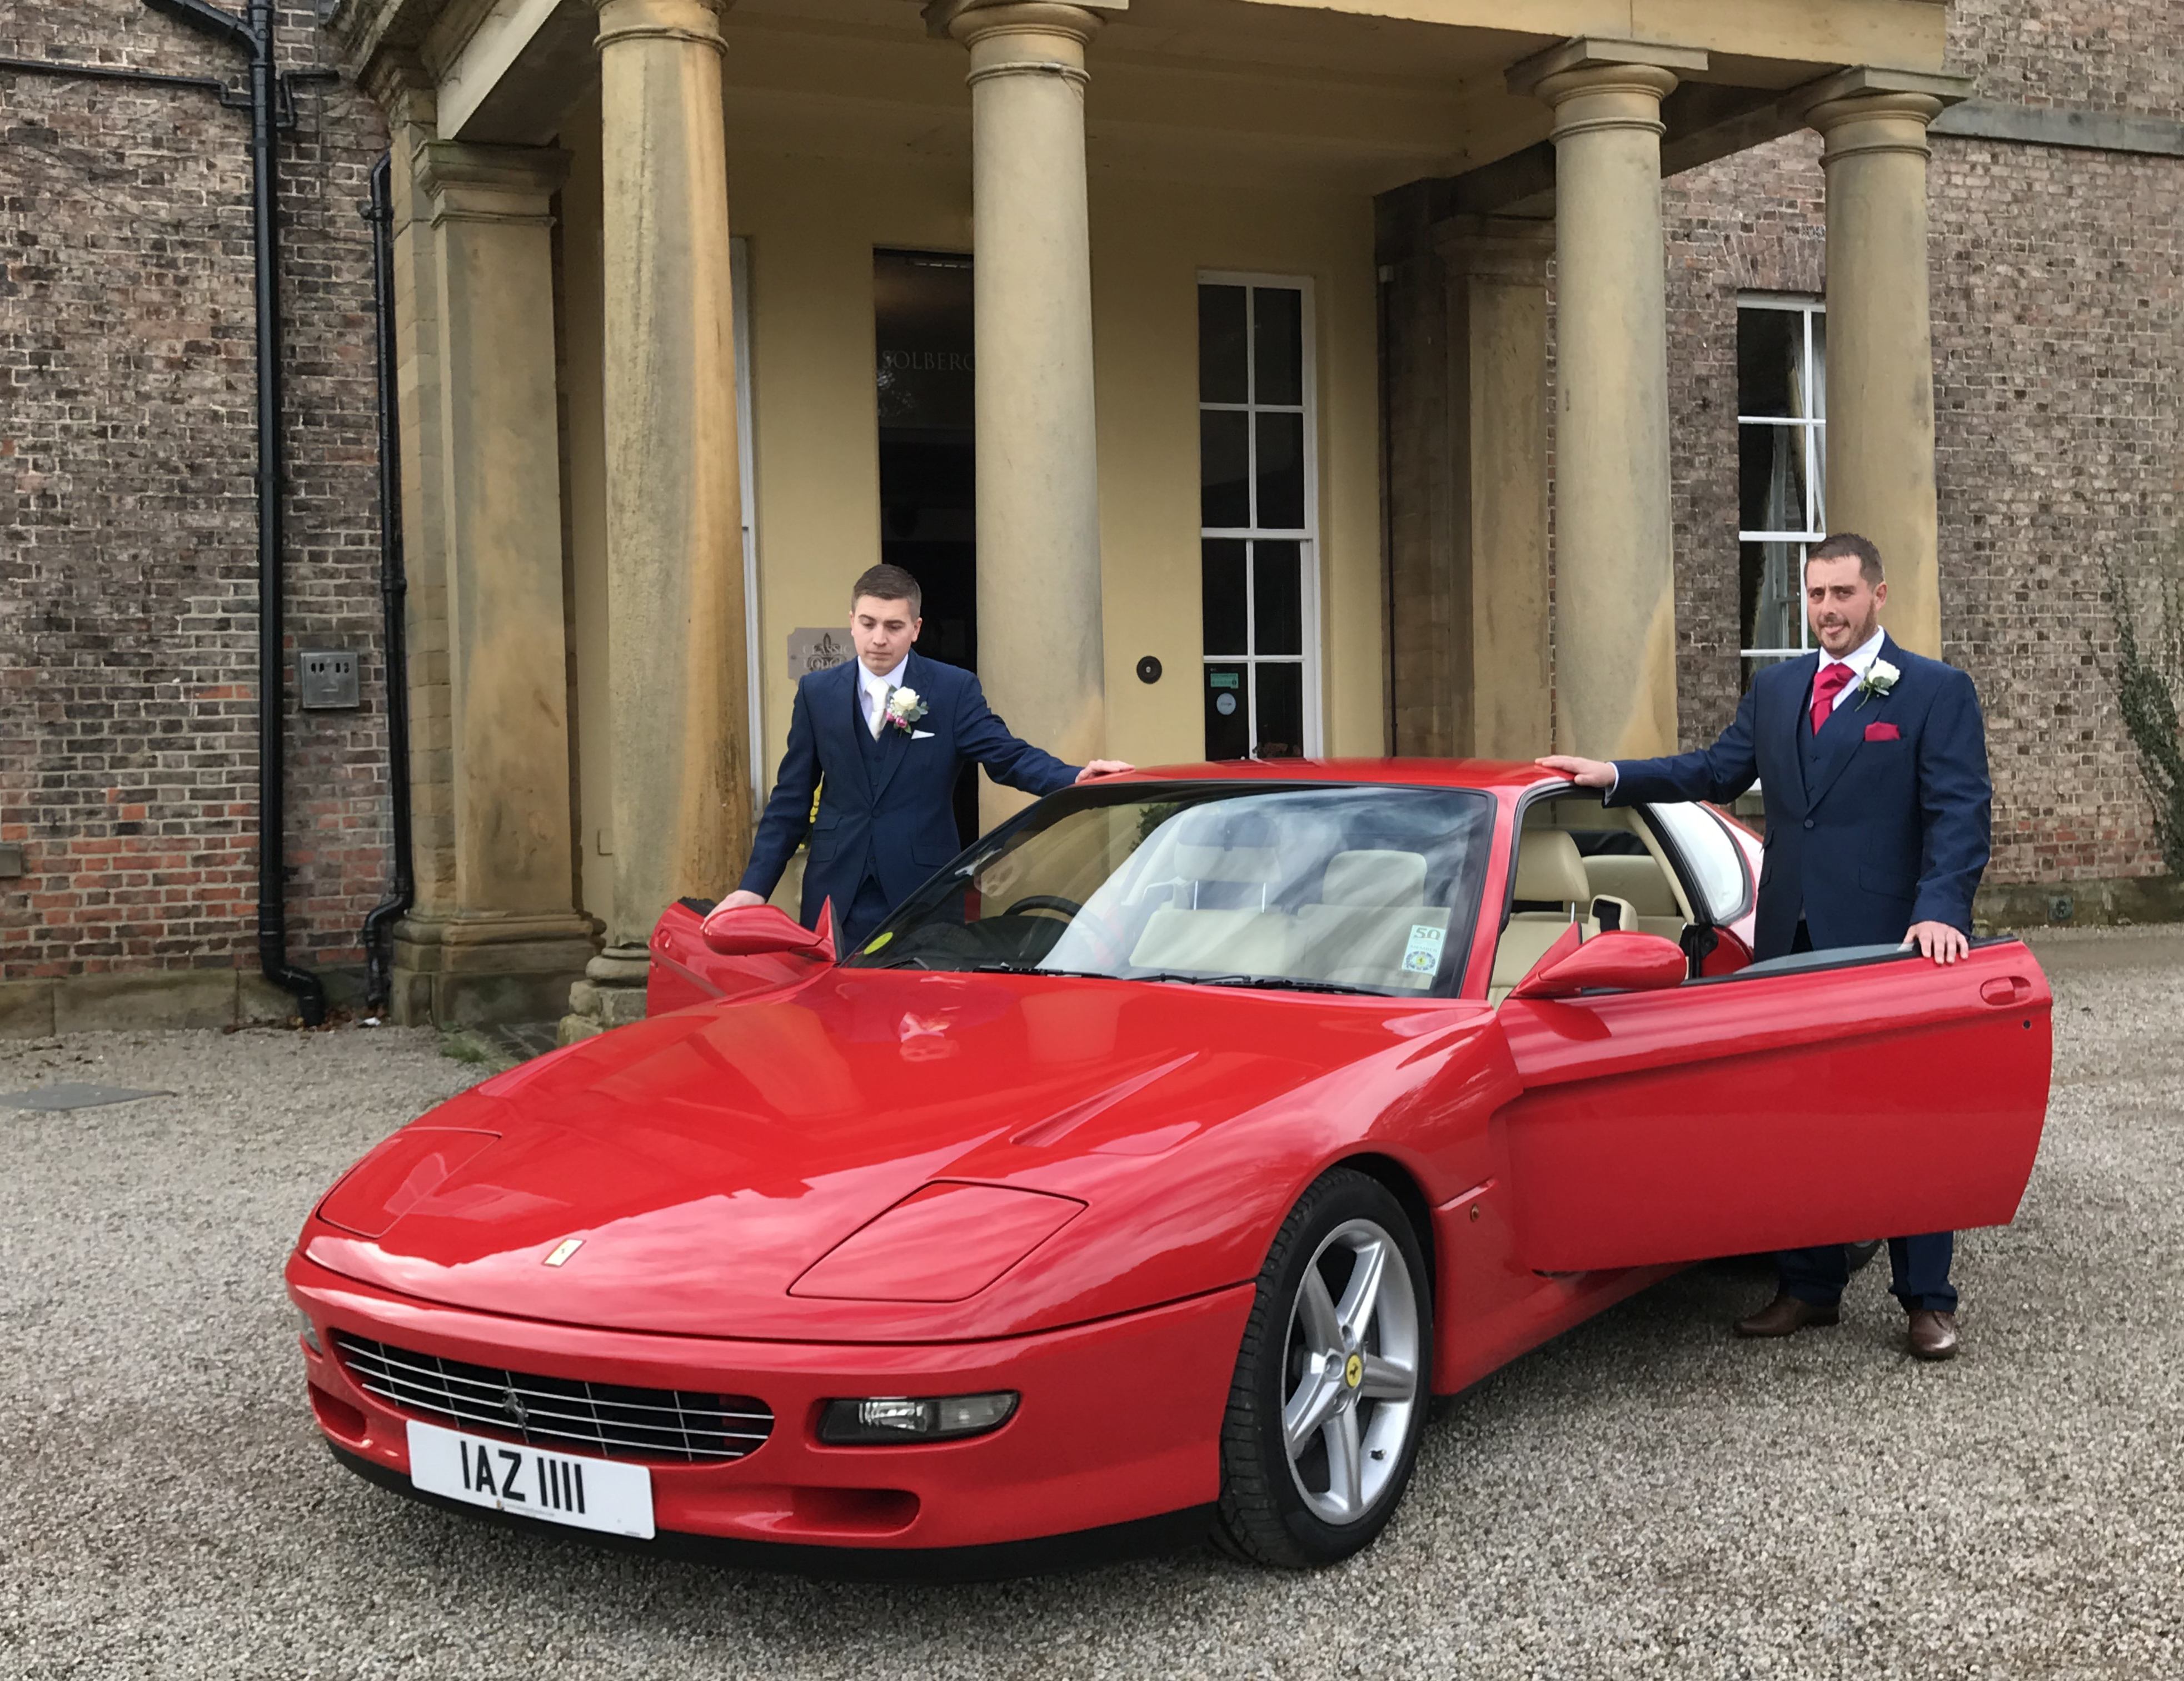 Ferrari 456GT with Groom and Bestman